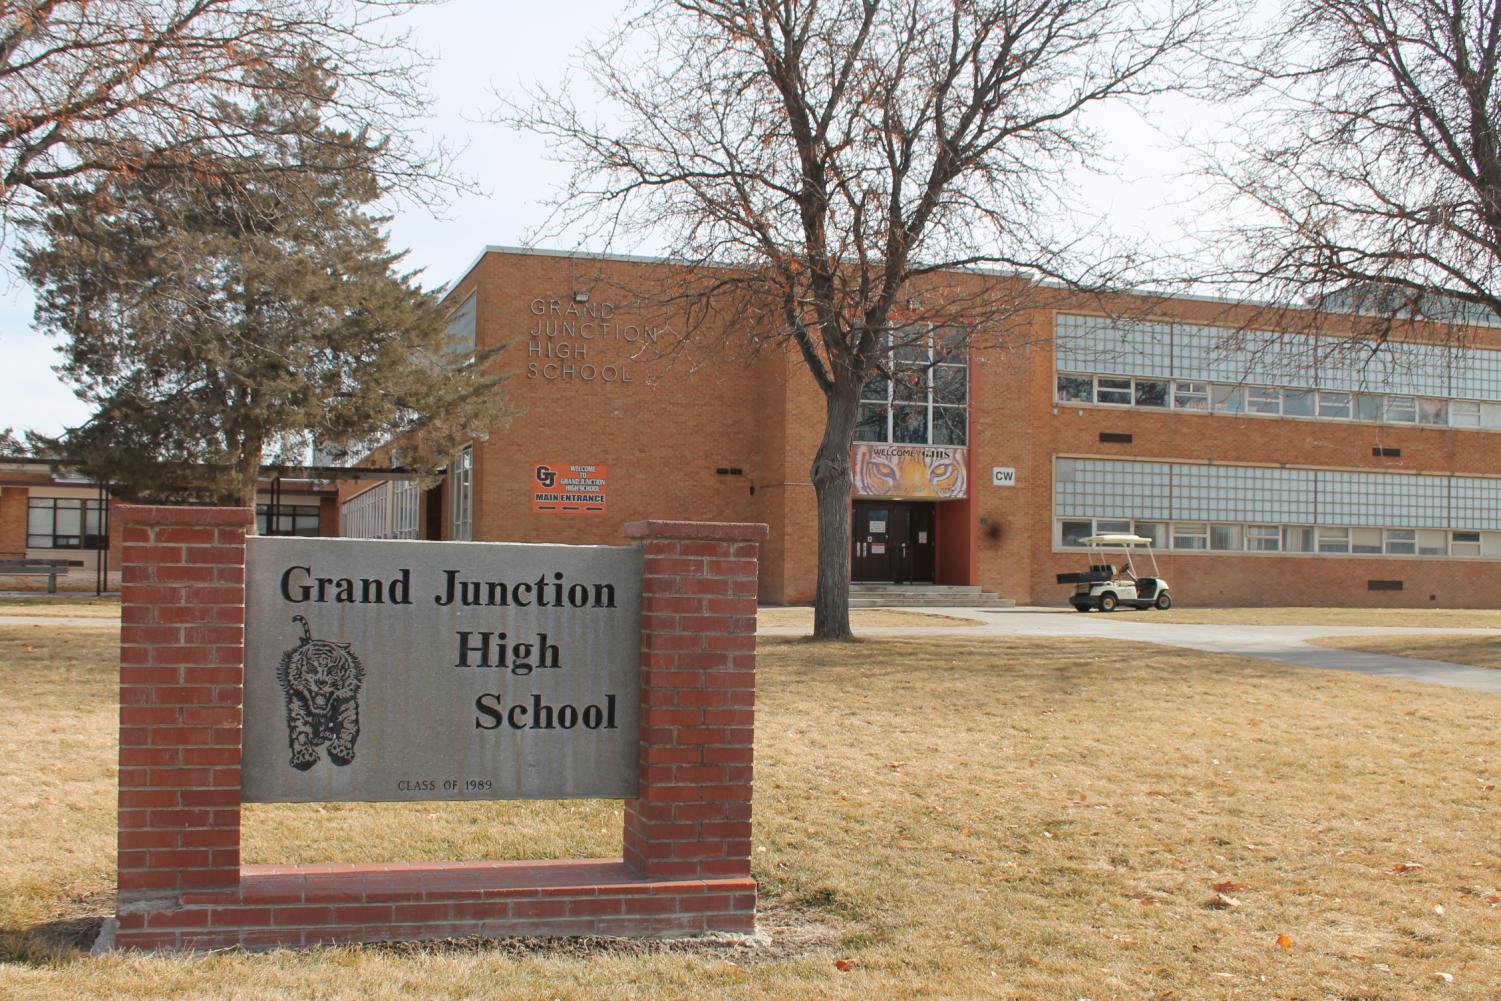 A walkout is planned for 2 p.m. Friday in front of Grand Junction High School entrance.